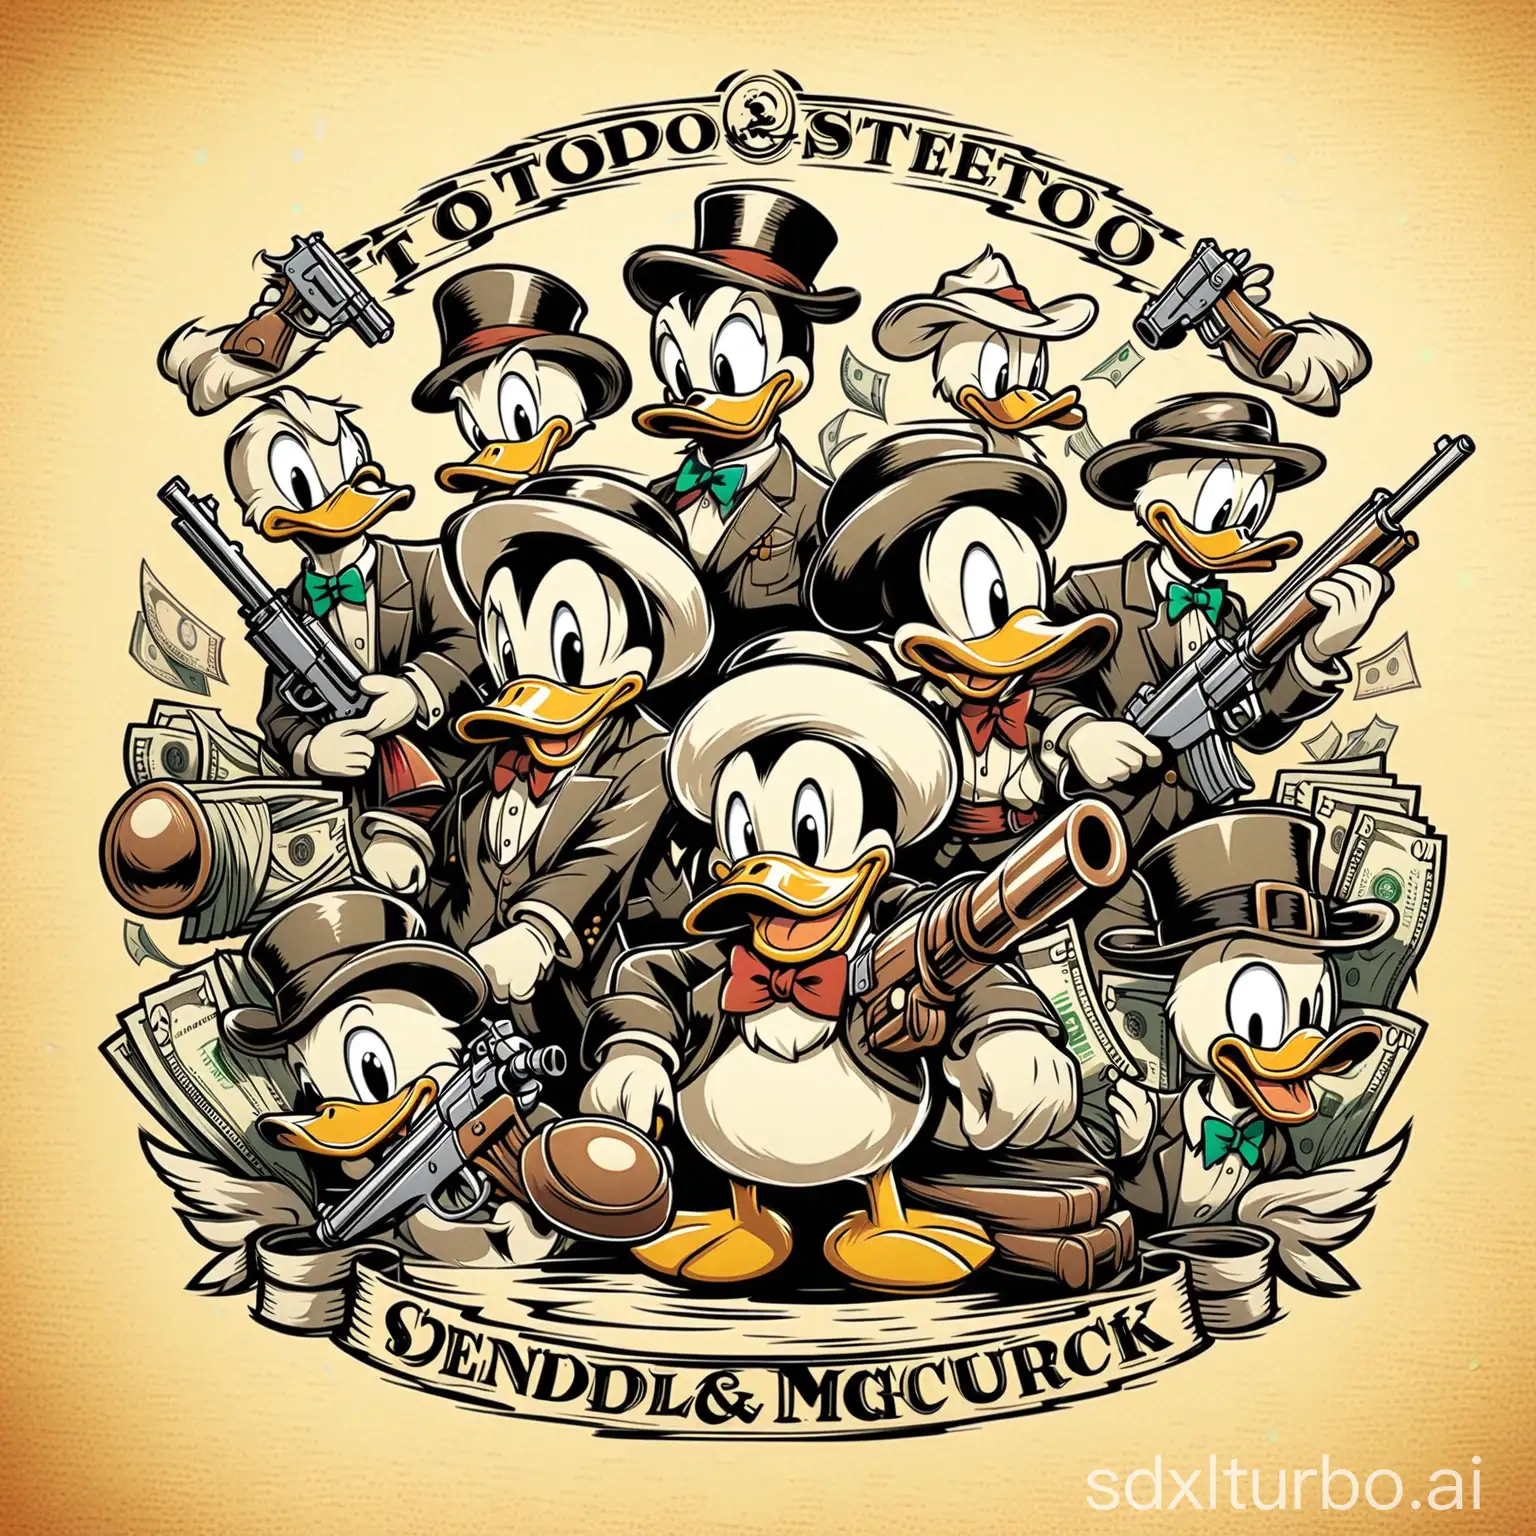 tattoo sketch, characters with money and guns, like gangsters, Donald Duck, Pluto, Scrooge McDuck